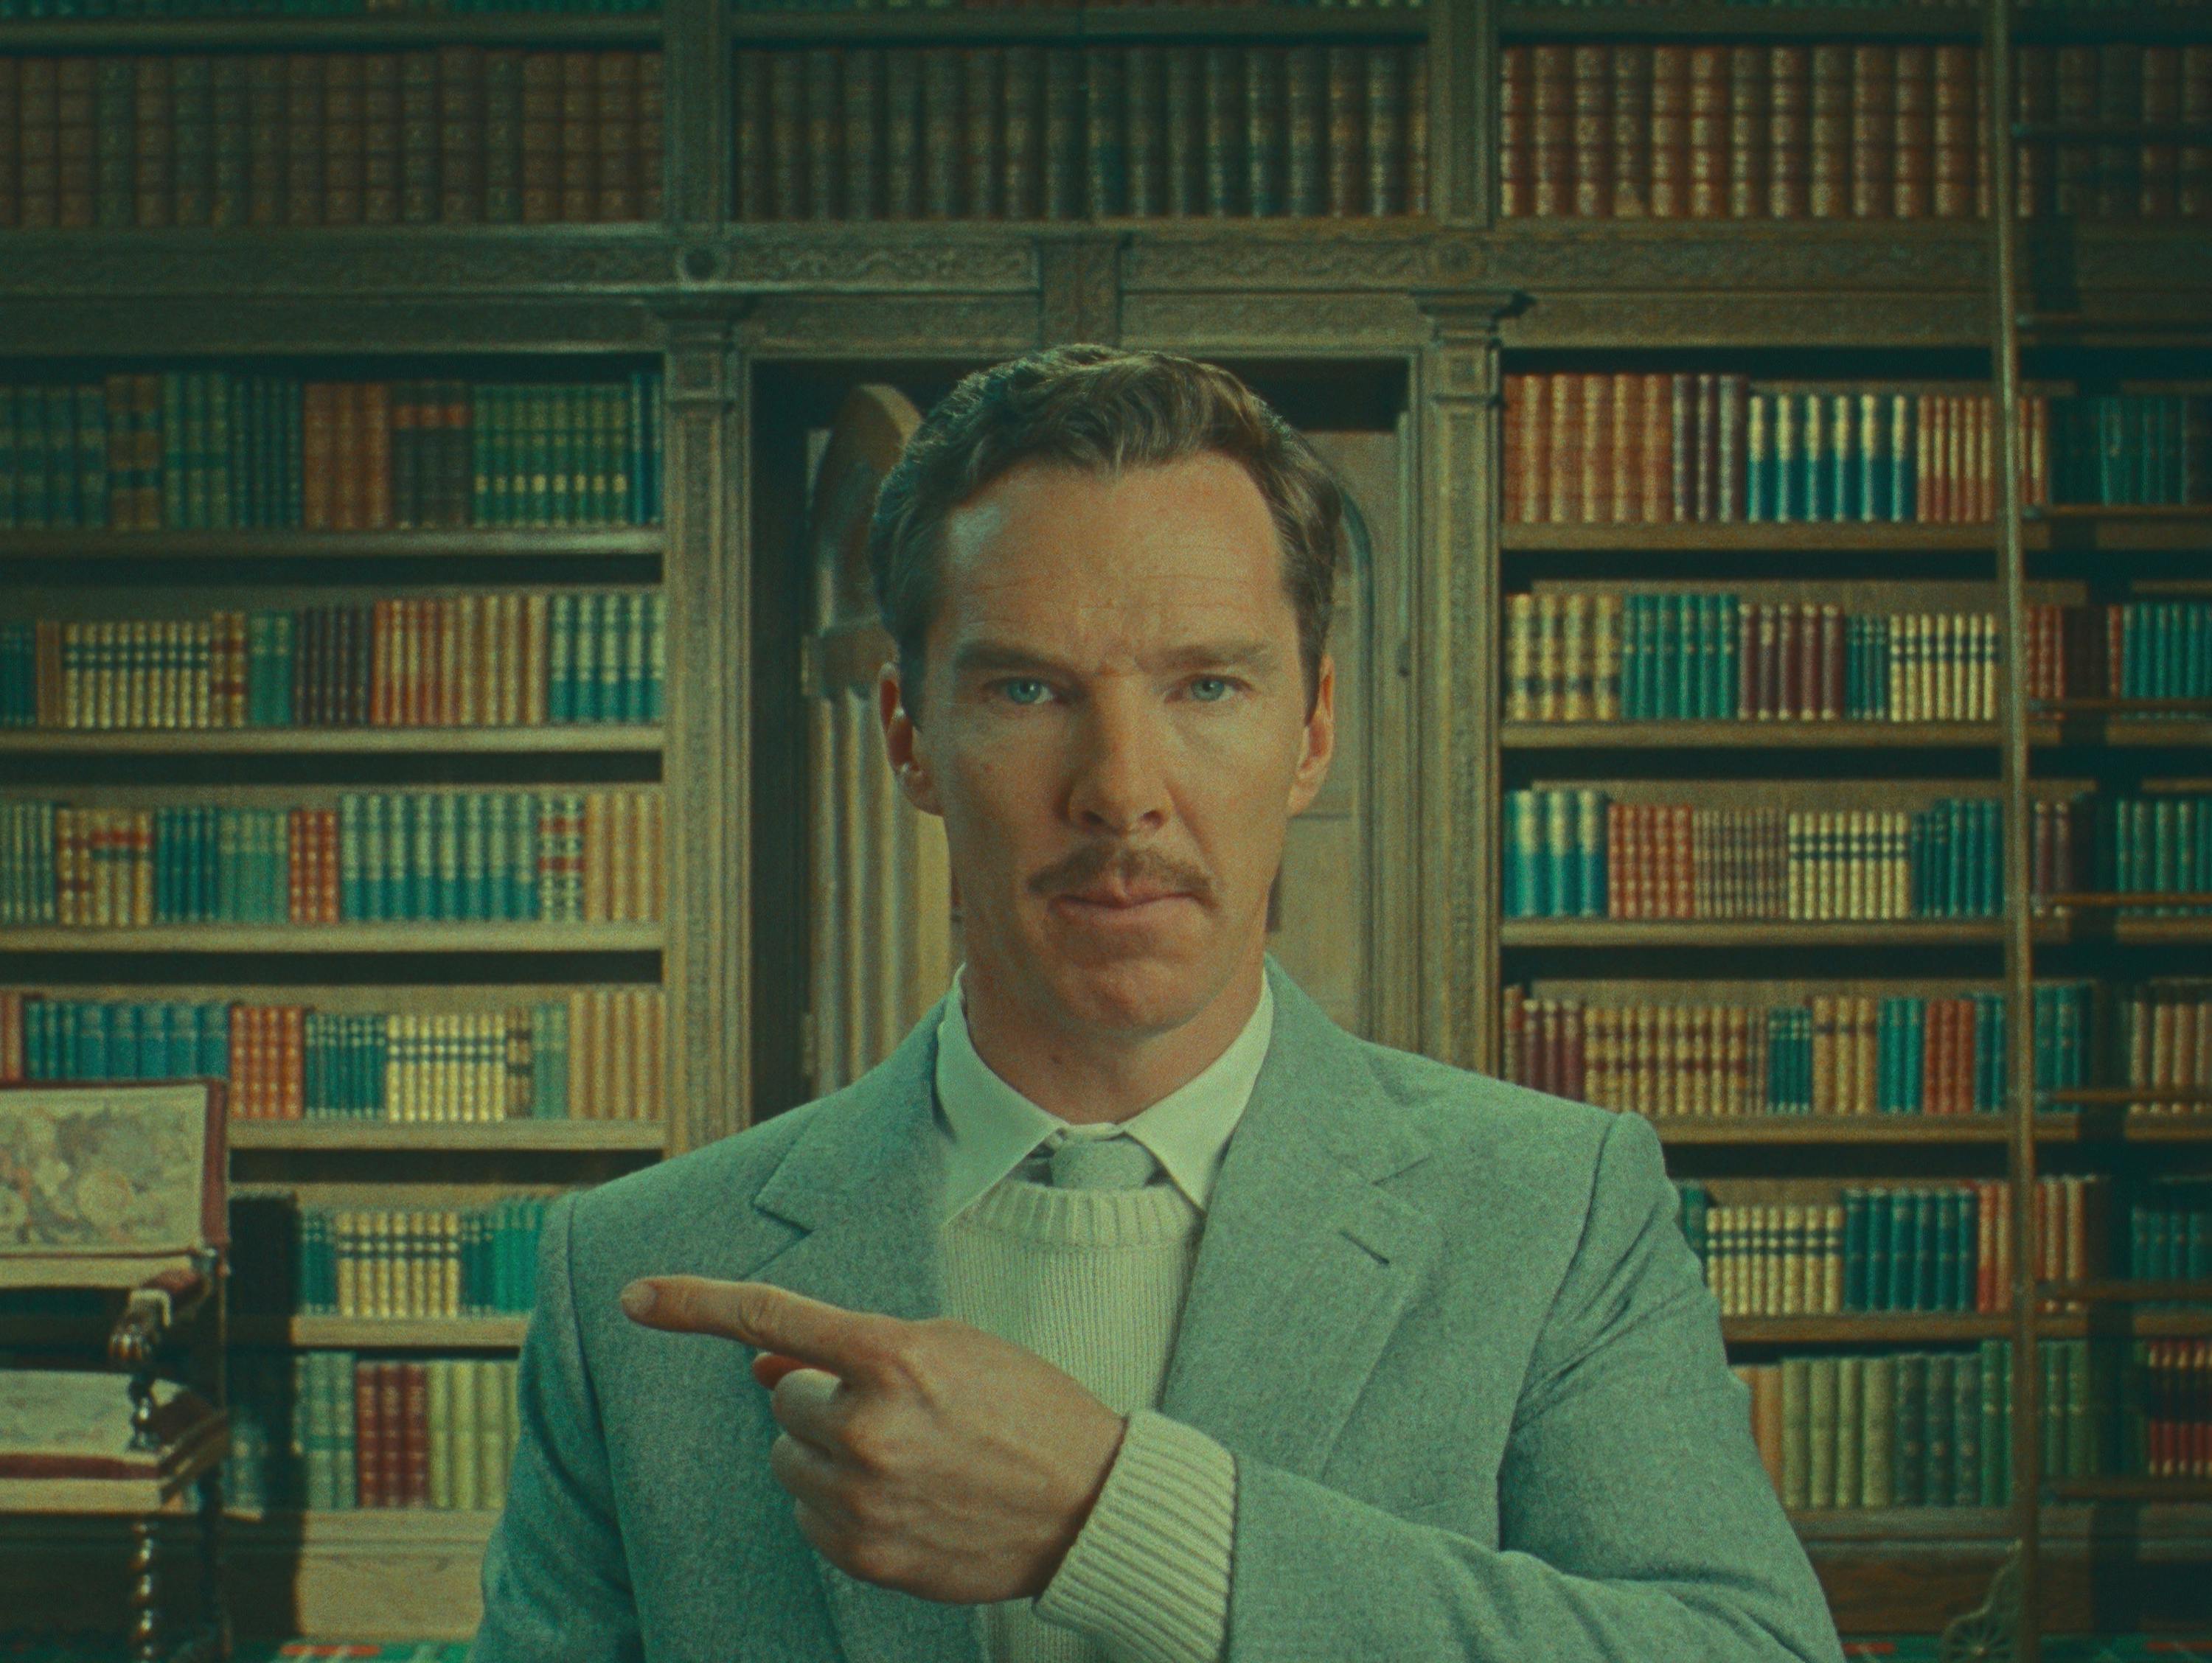 Henry Sugar (Benedict Cumberbatch) points at something offscreen and wears a sweater, blazer, tie combo.